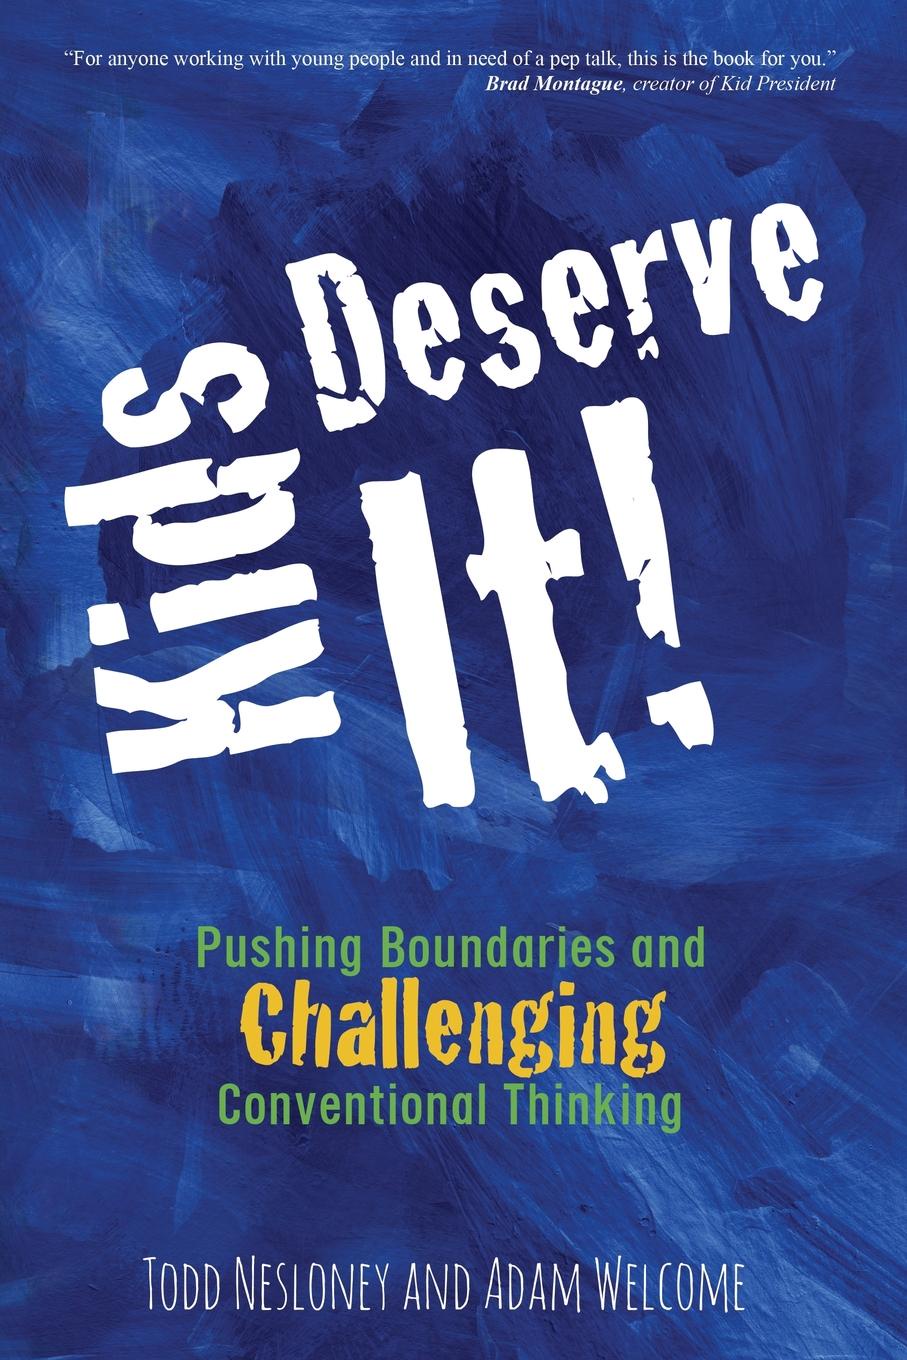 Kids Deserve It. Pushing Boundaries and Challenging Conventional Thinking